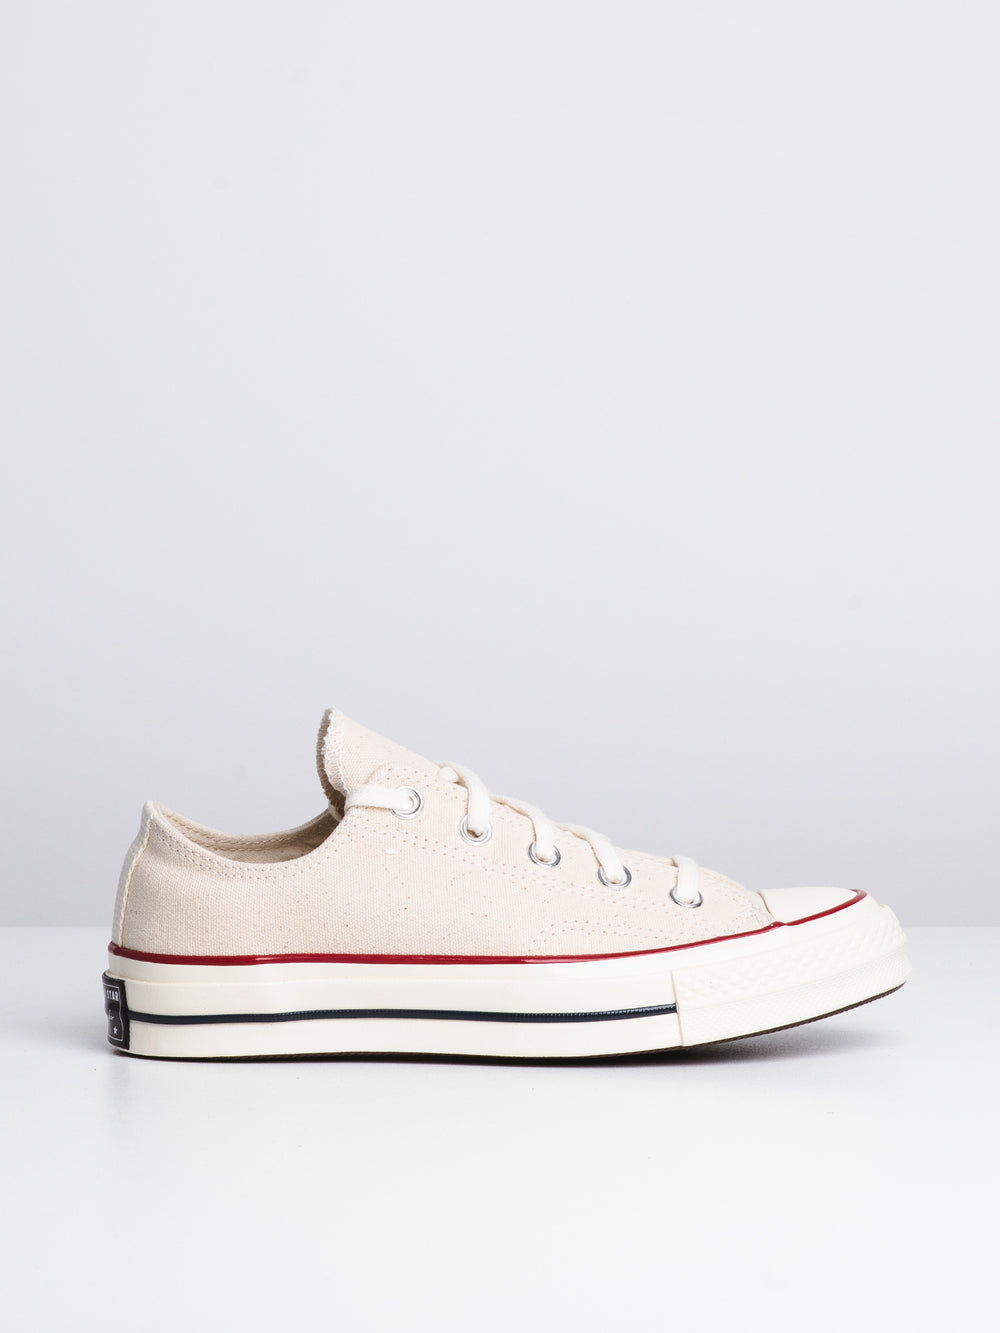 WOMENS CONVERSE CHUCK 70 E OX CANVAS SNEAKERS - CLEARANCE